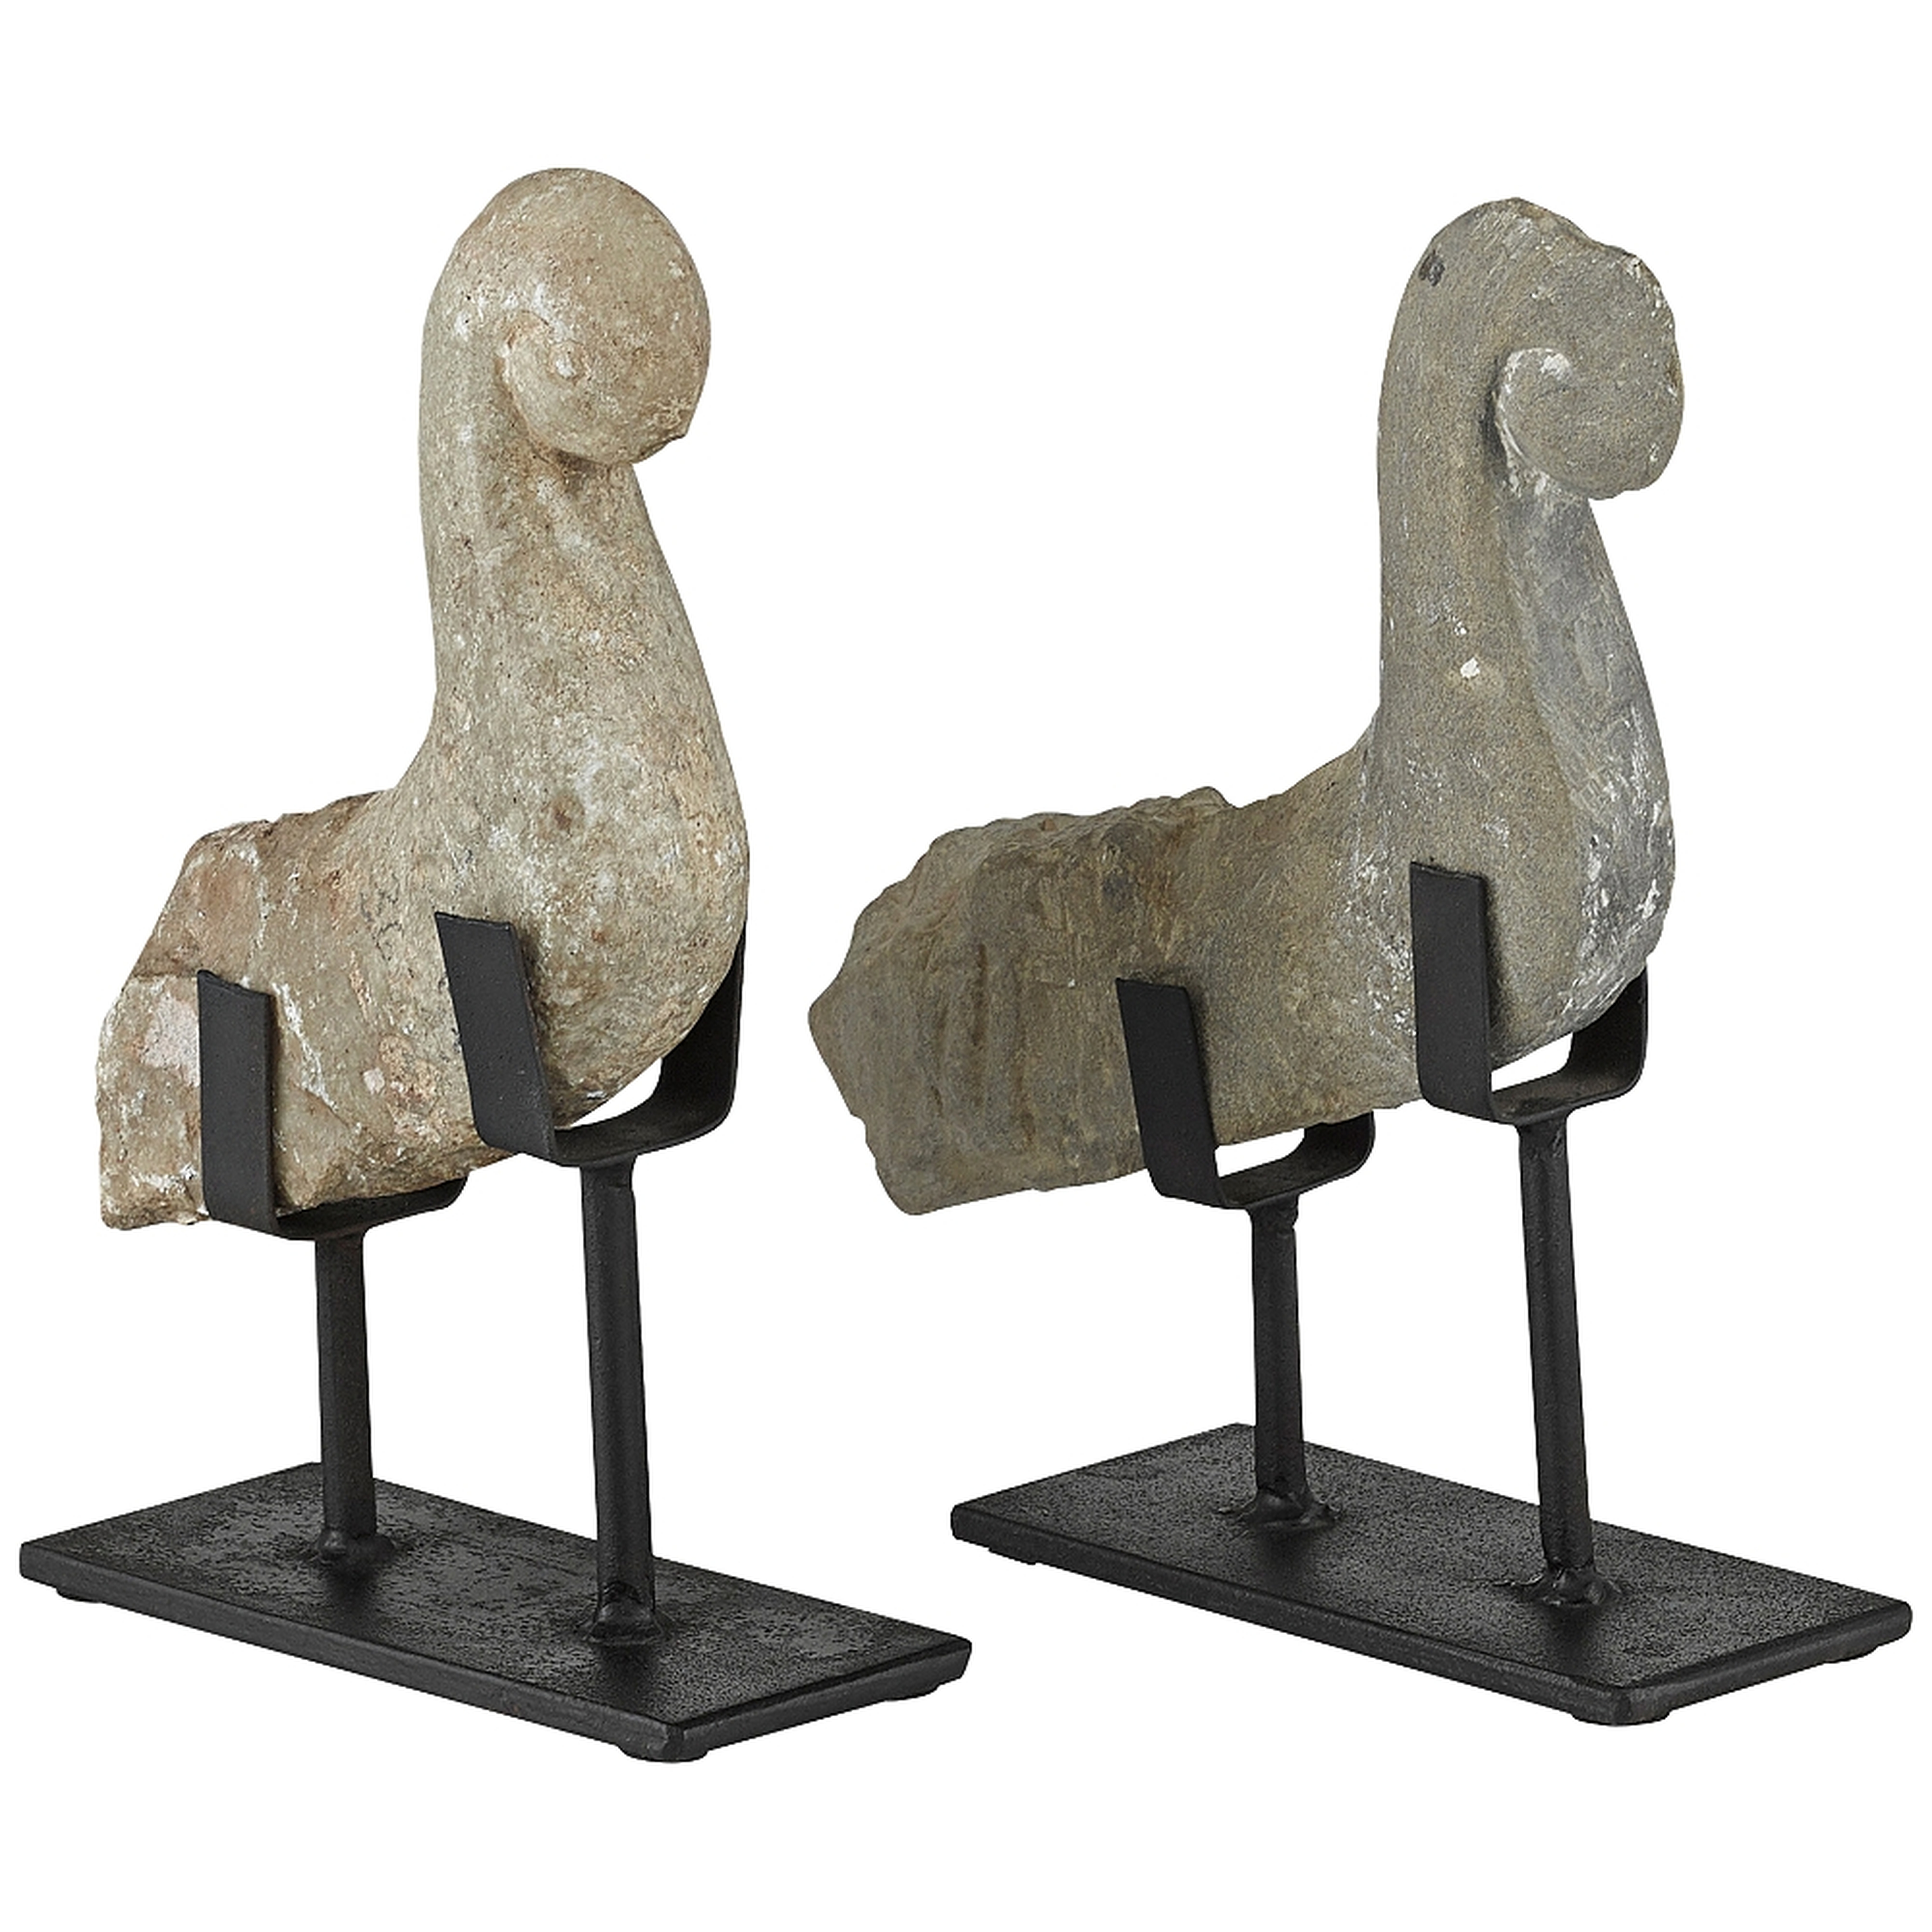 Magpie Natural and Black Bird Sculptures Set of 2 - Style # 88R68 - Lamps Plus